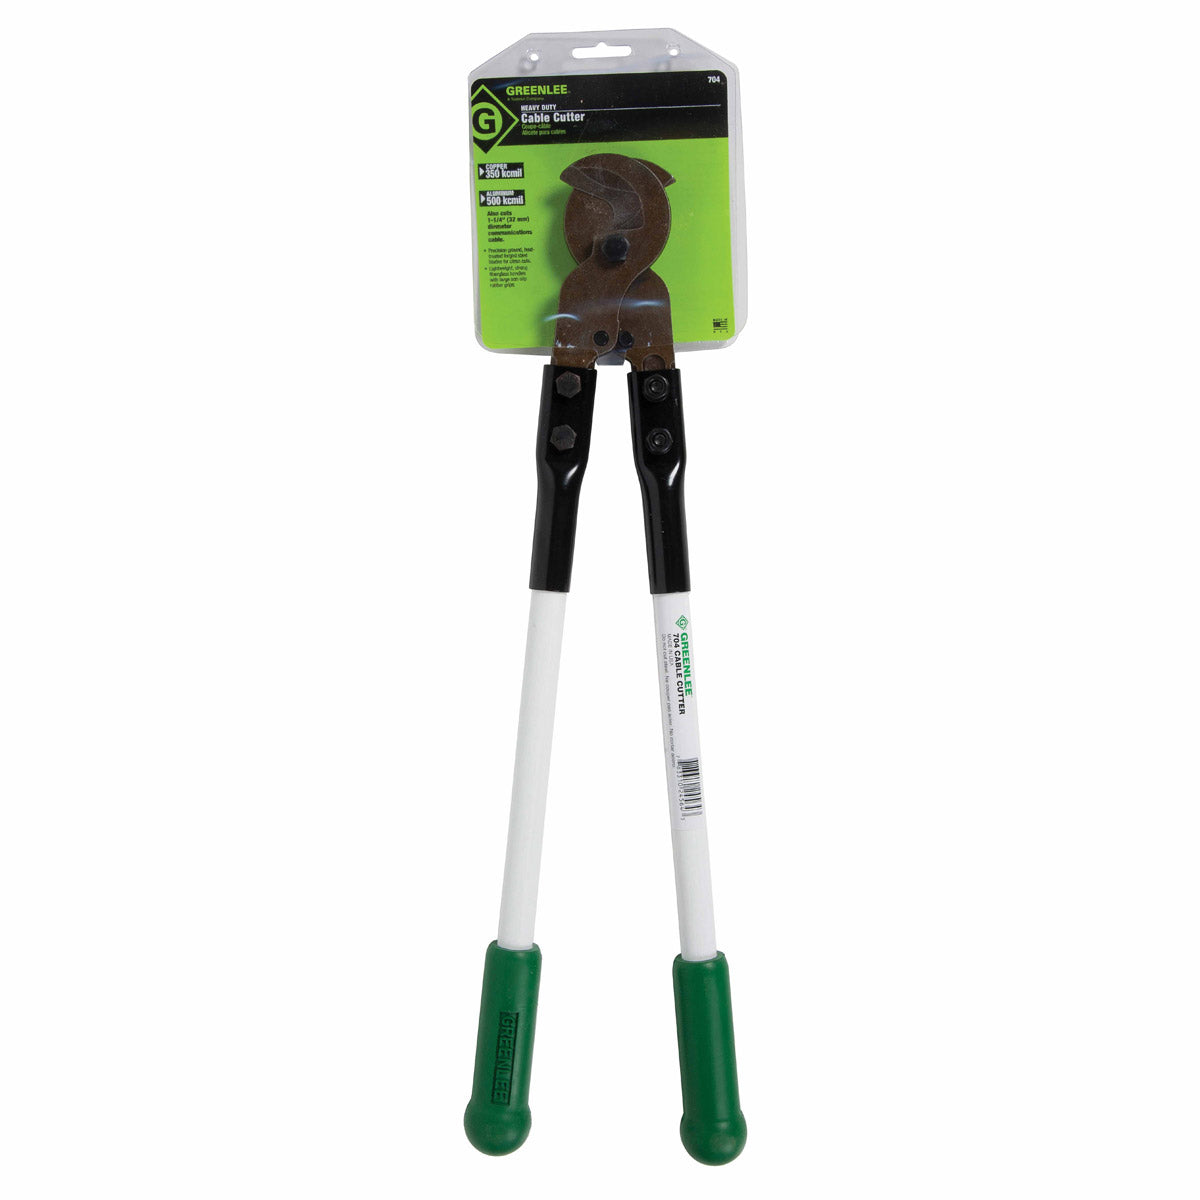 Greenlee 704 Heavy-Duty Cable Cutter 350 kcmil (MCM)